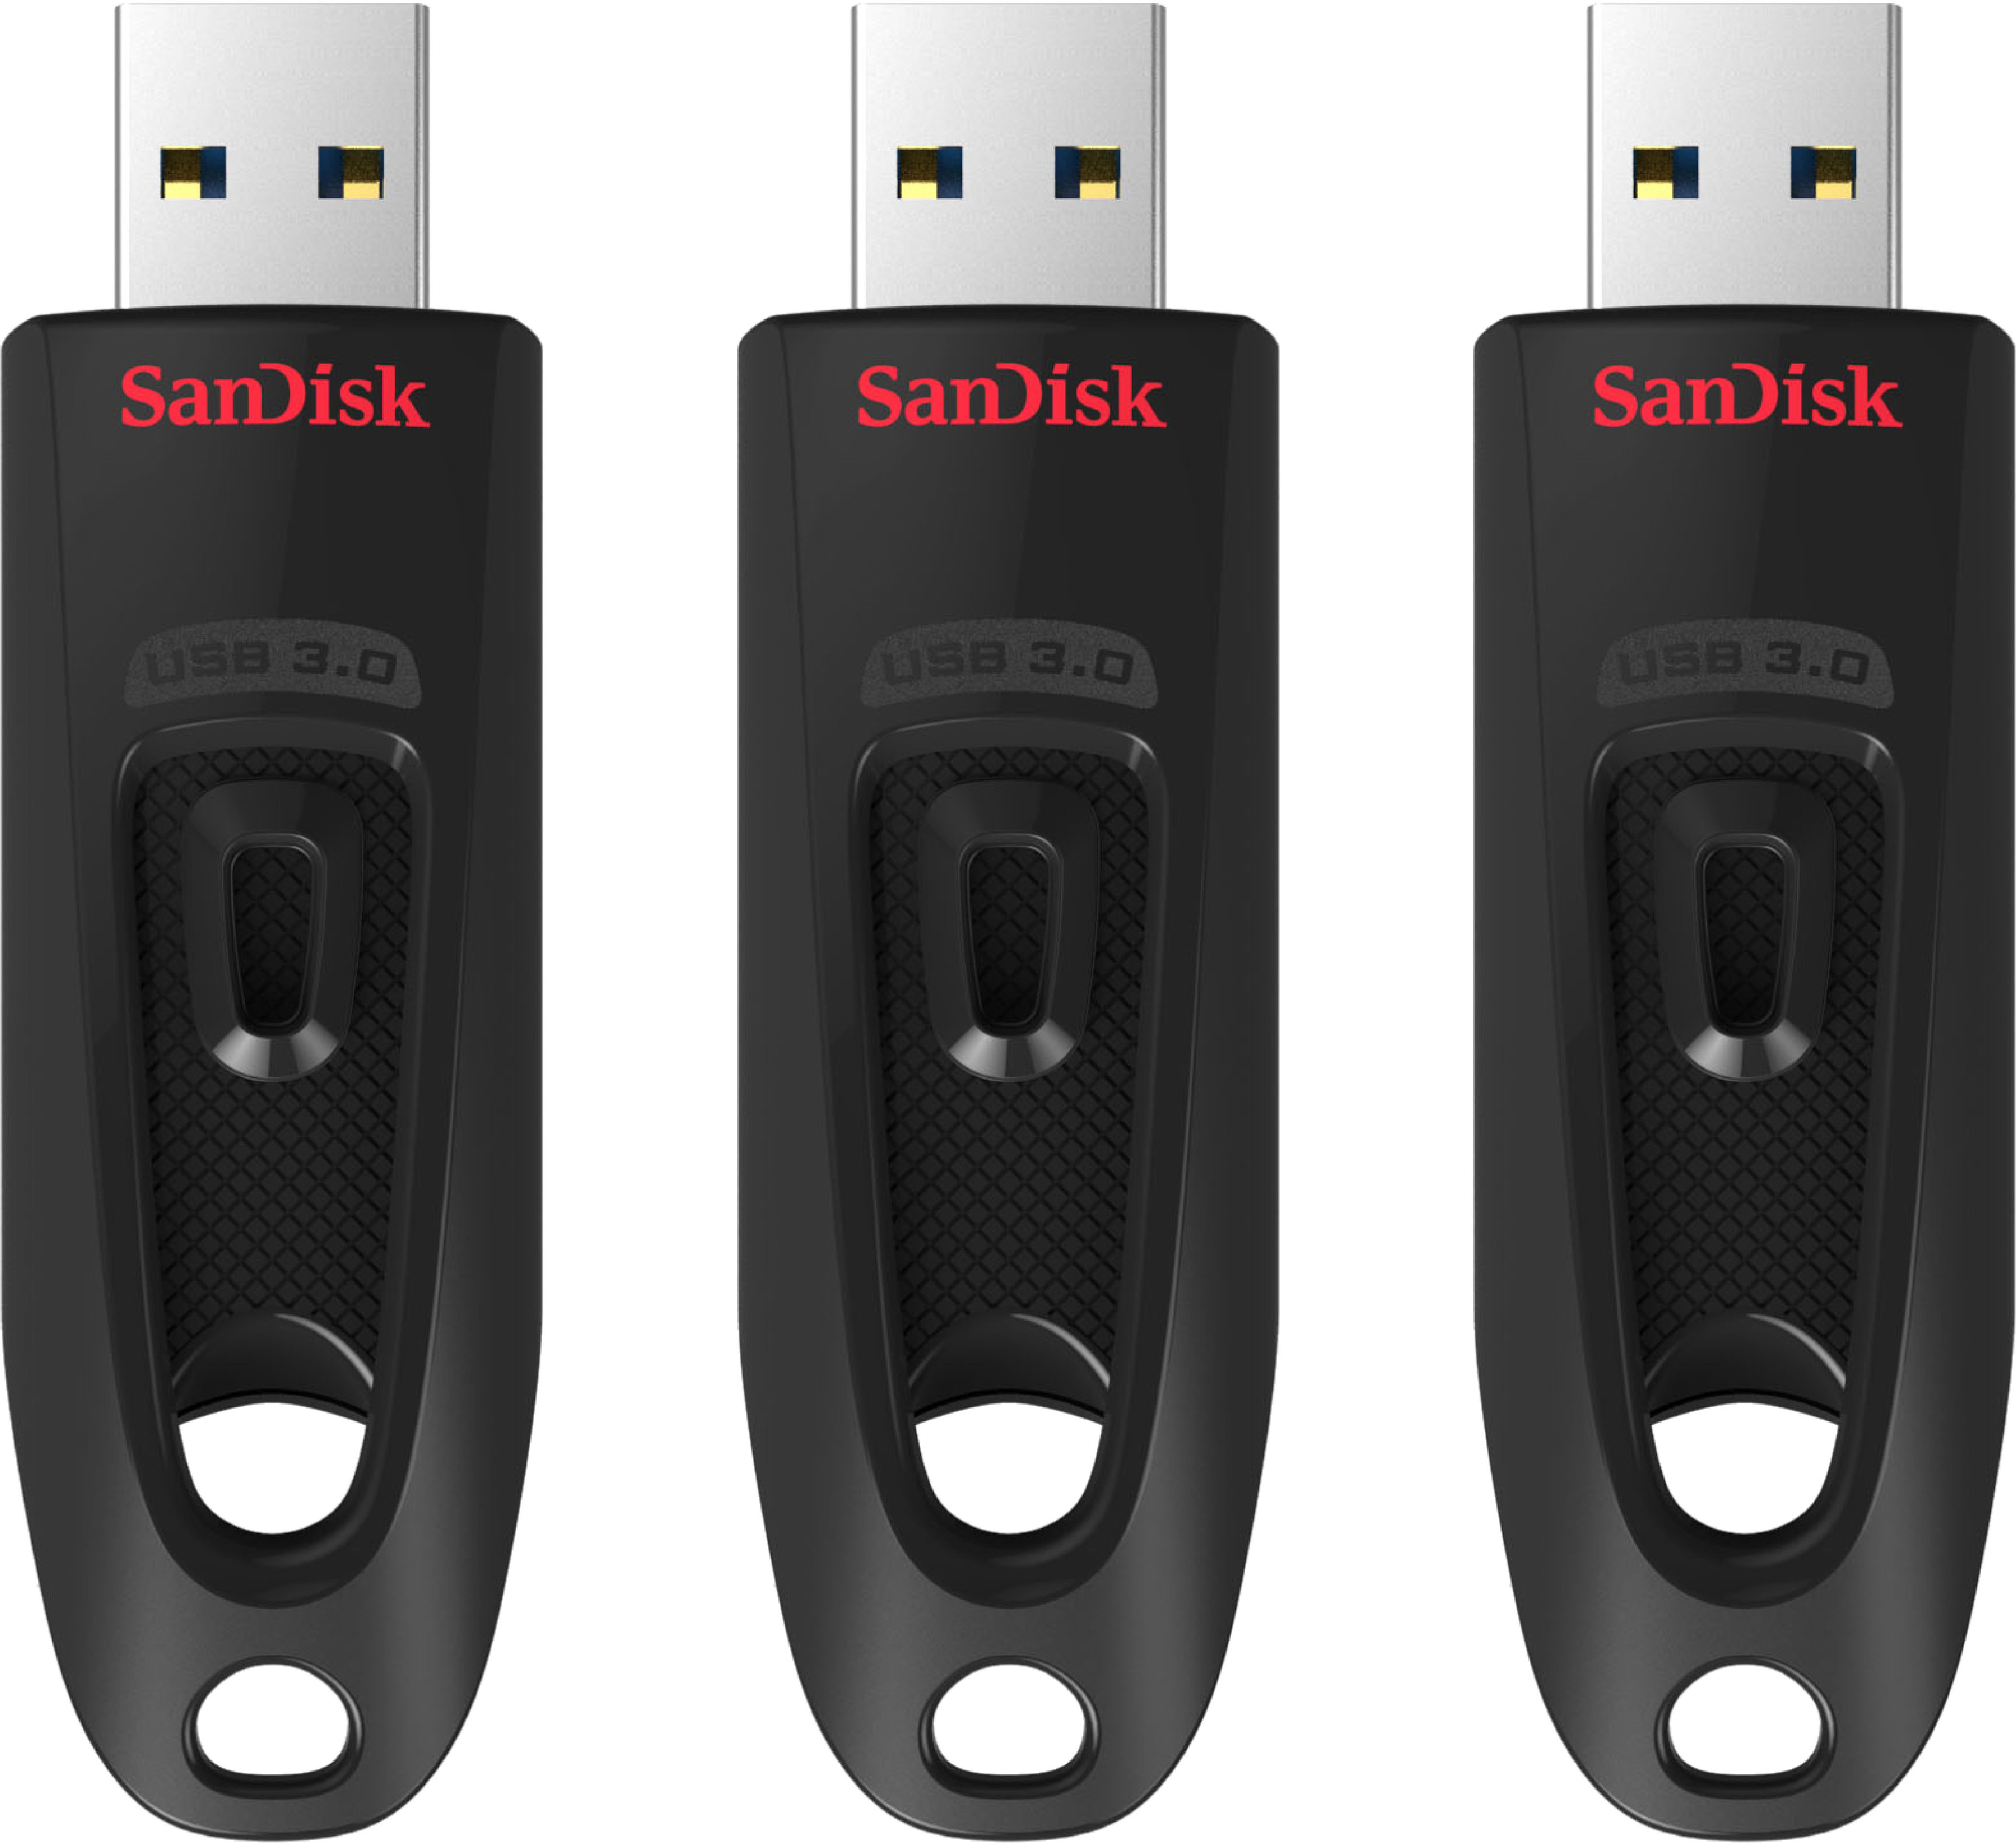 SanDisk Ultra 32GB USB Flash Drive with Encryption (3-Pack) Black SDCZ48-032G-GAM46T - Best Buy